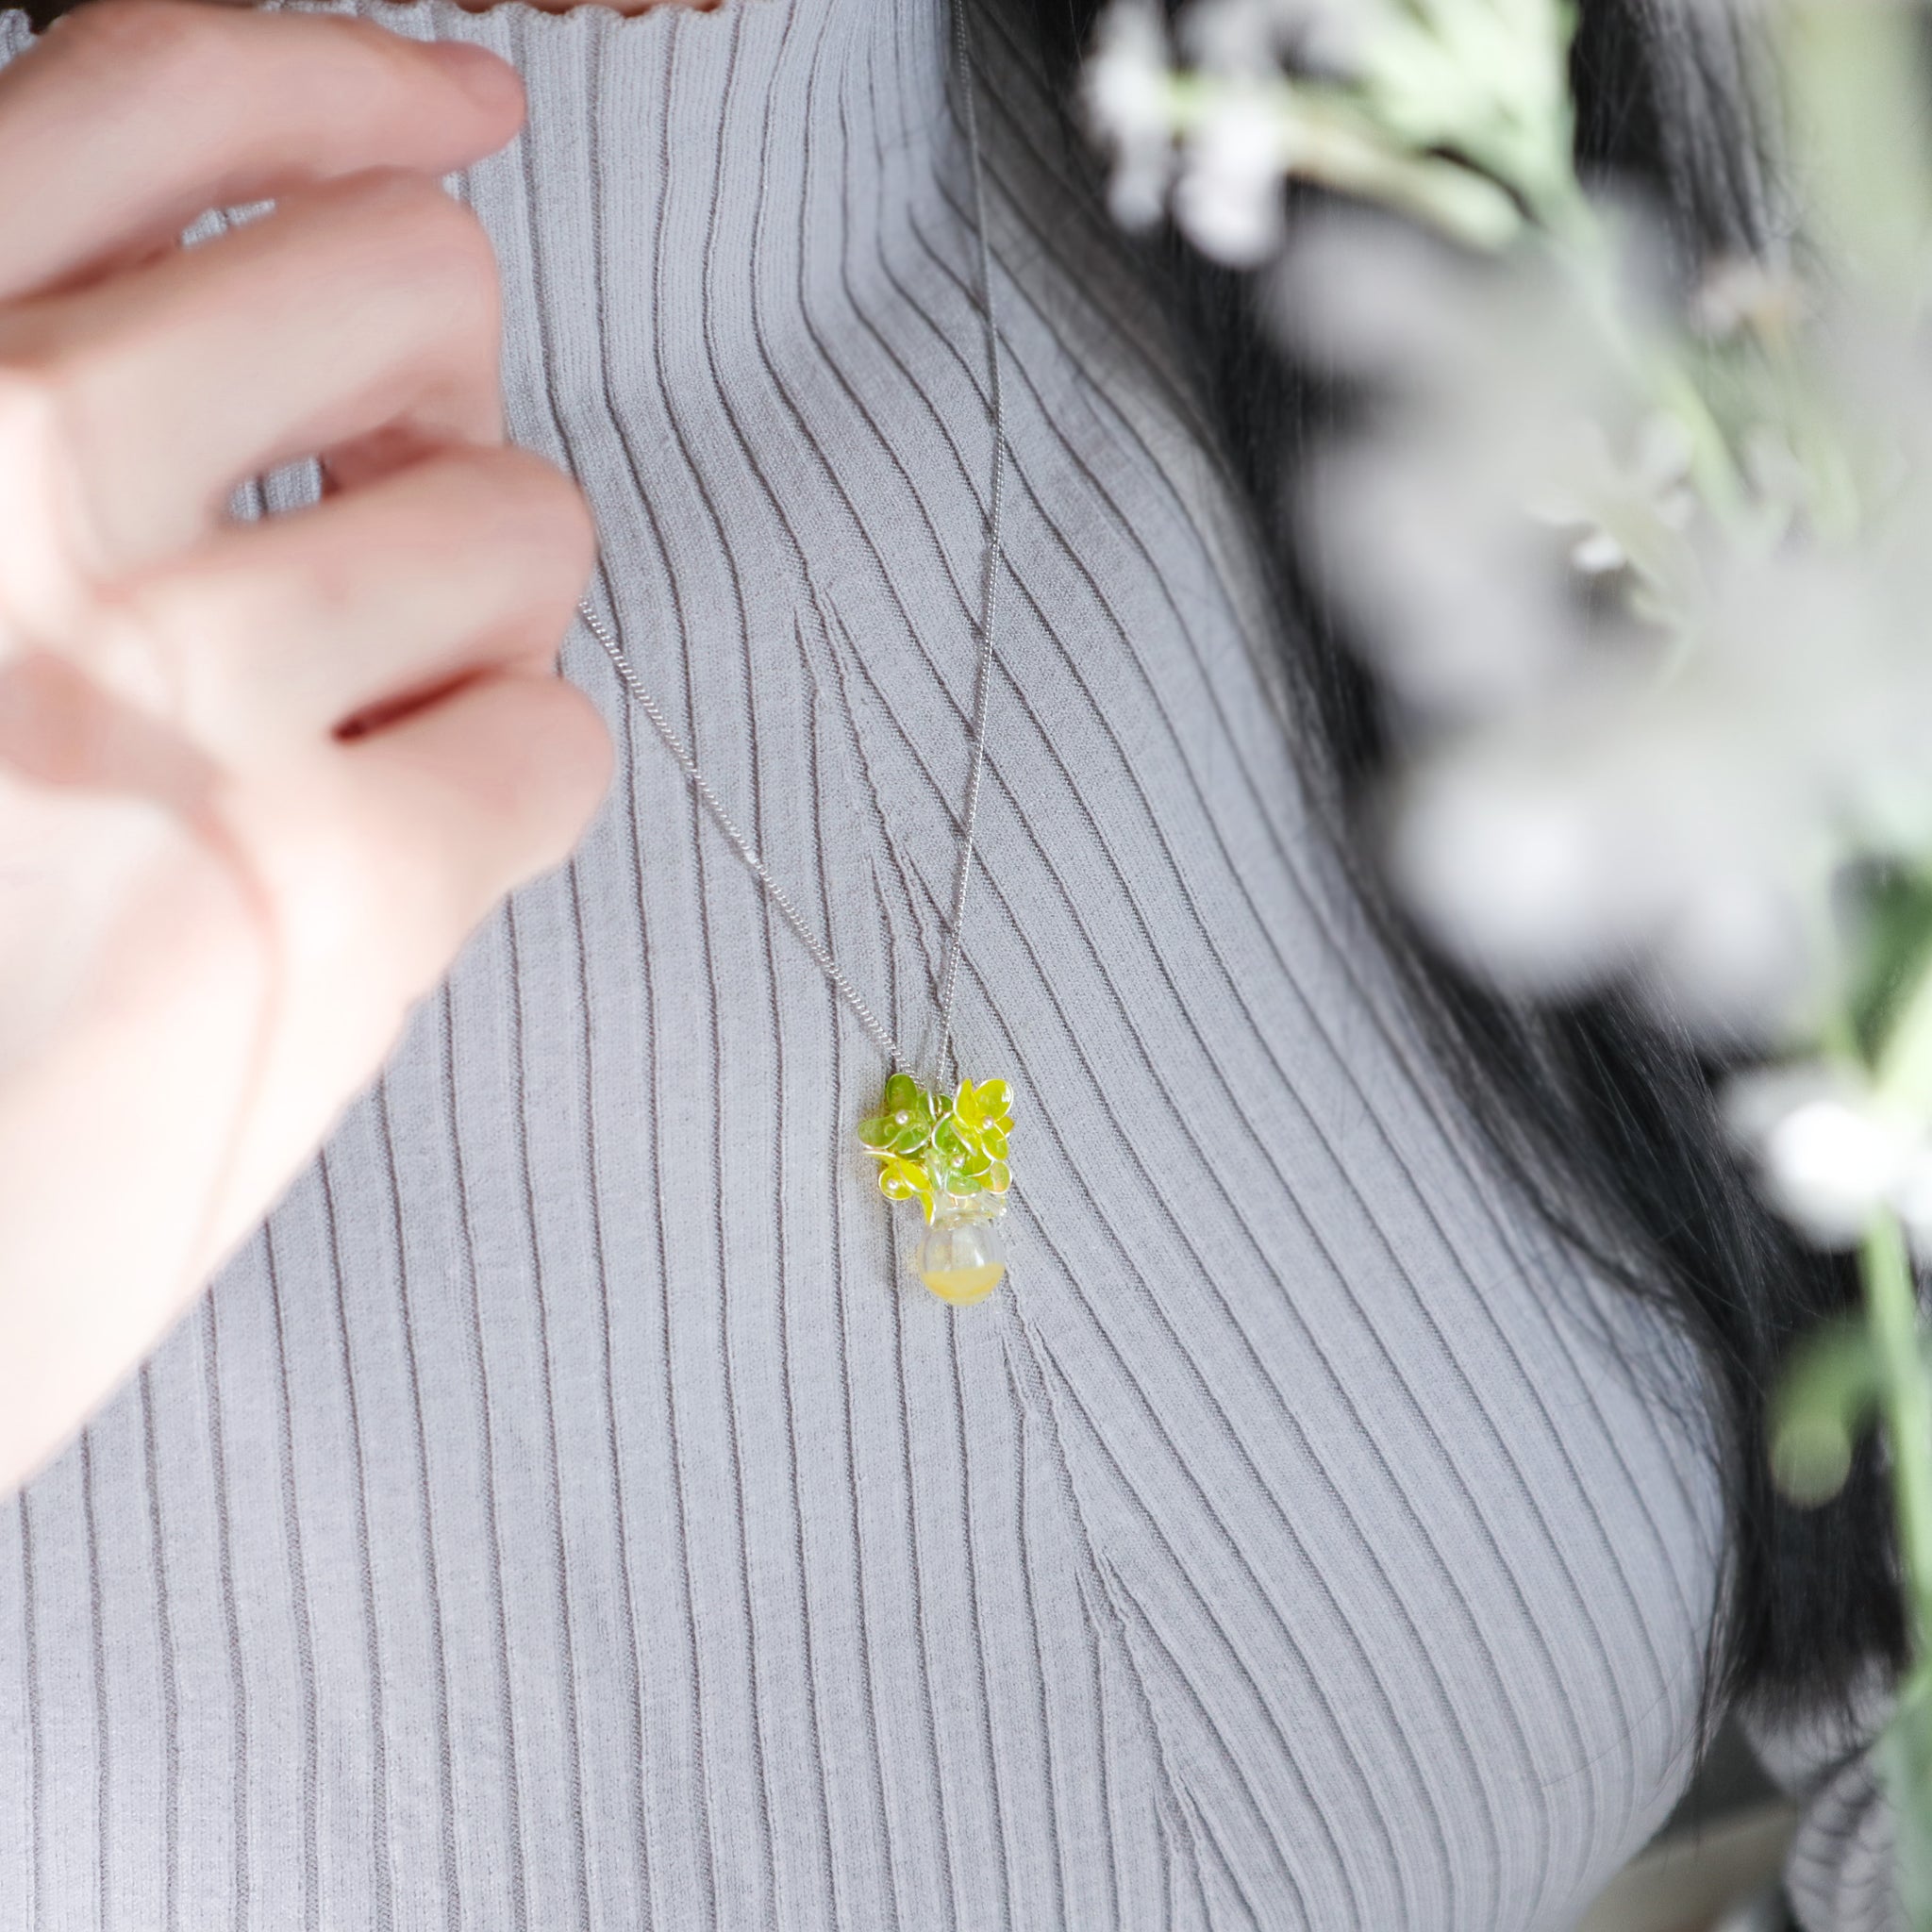 Vase aroma necklace with the scent of rape blossoms